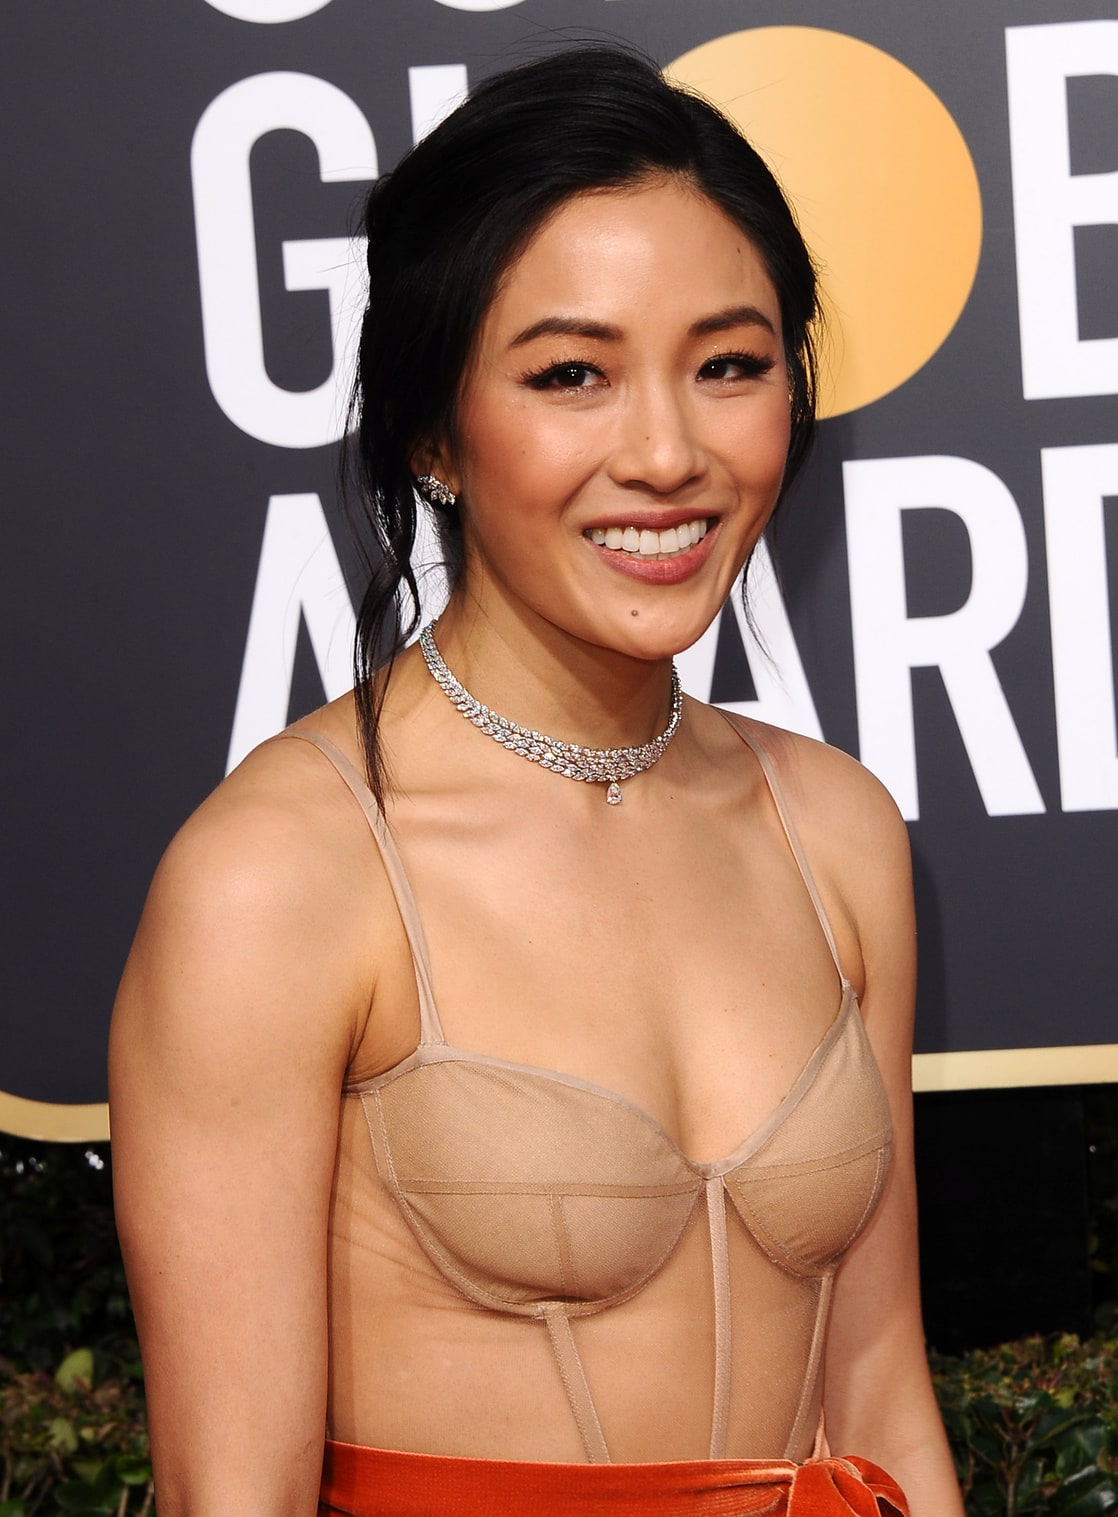 Constance wu sexy pics - Constance Wu on IMDb: Movies, TV, Celebs, and more...